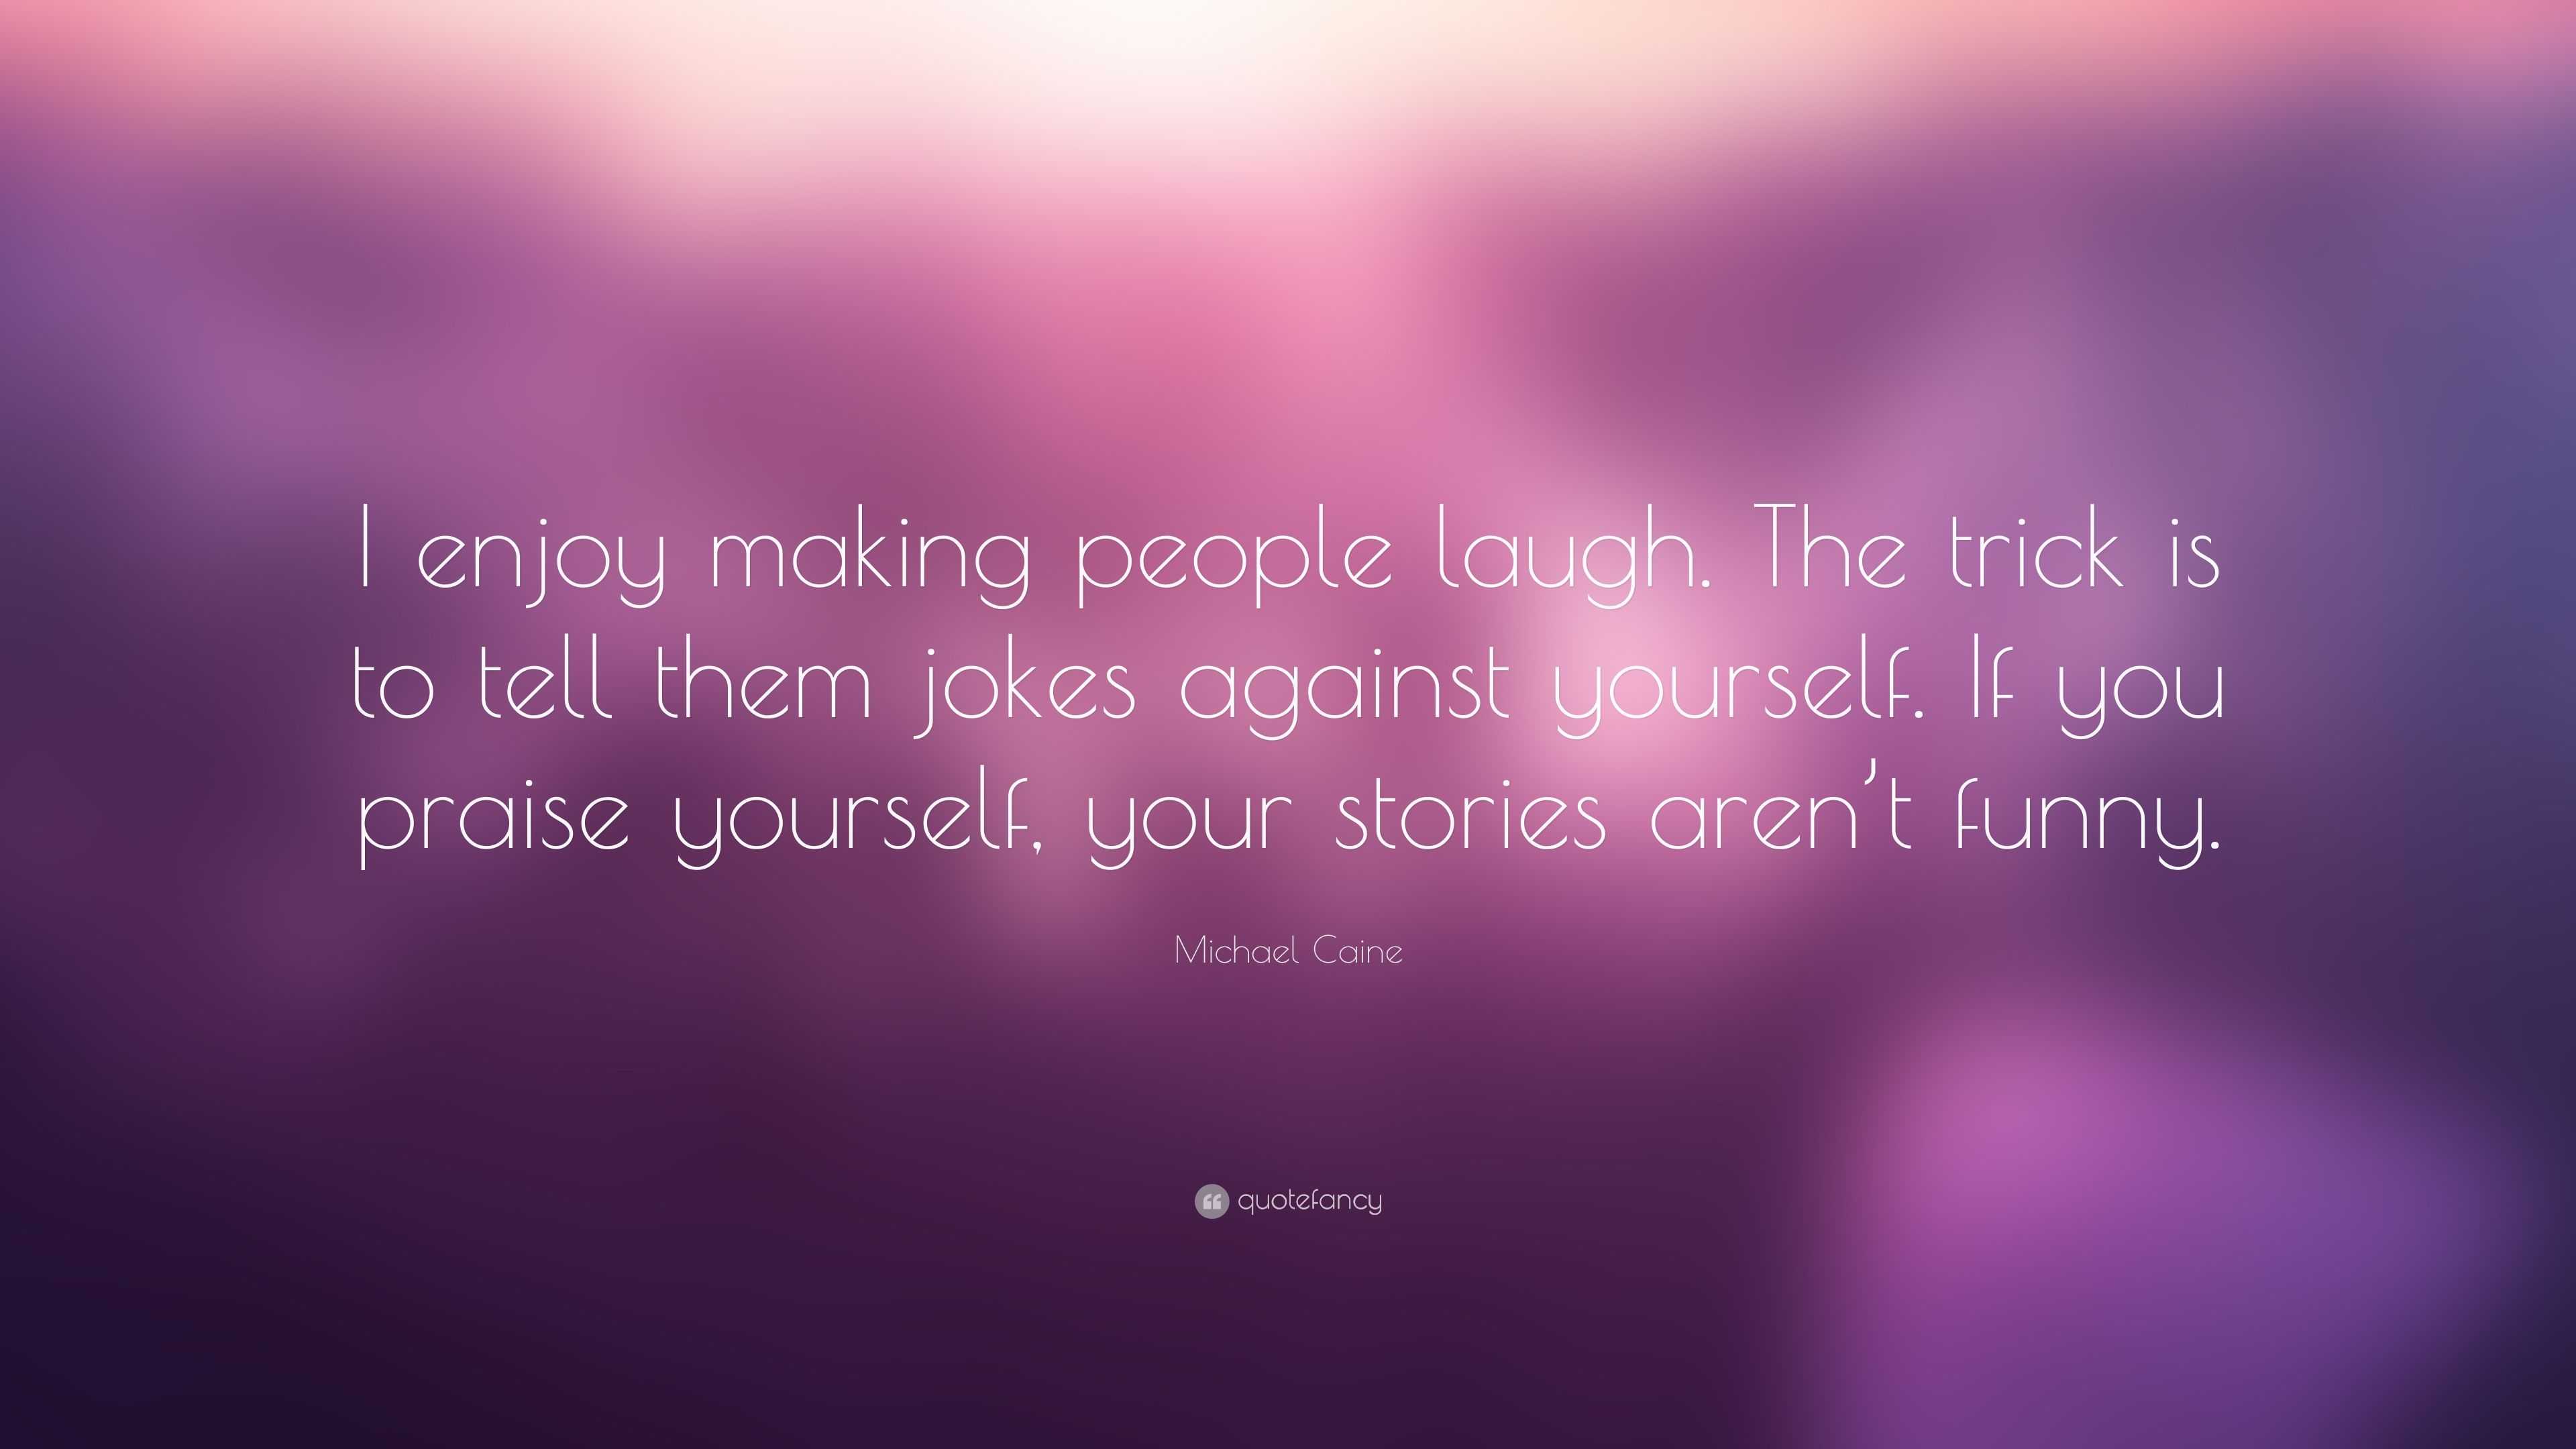 Michael Caine Quote: “I enjoy making people laugh. The trick is to tell  them jokes against yourself. If you praise yourself, your stories aren...”